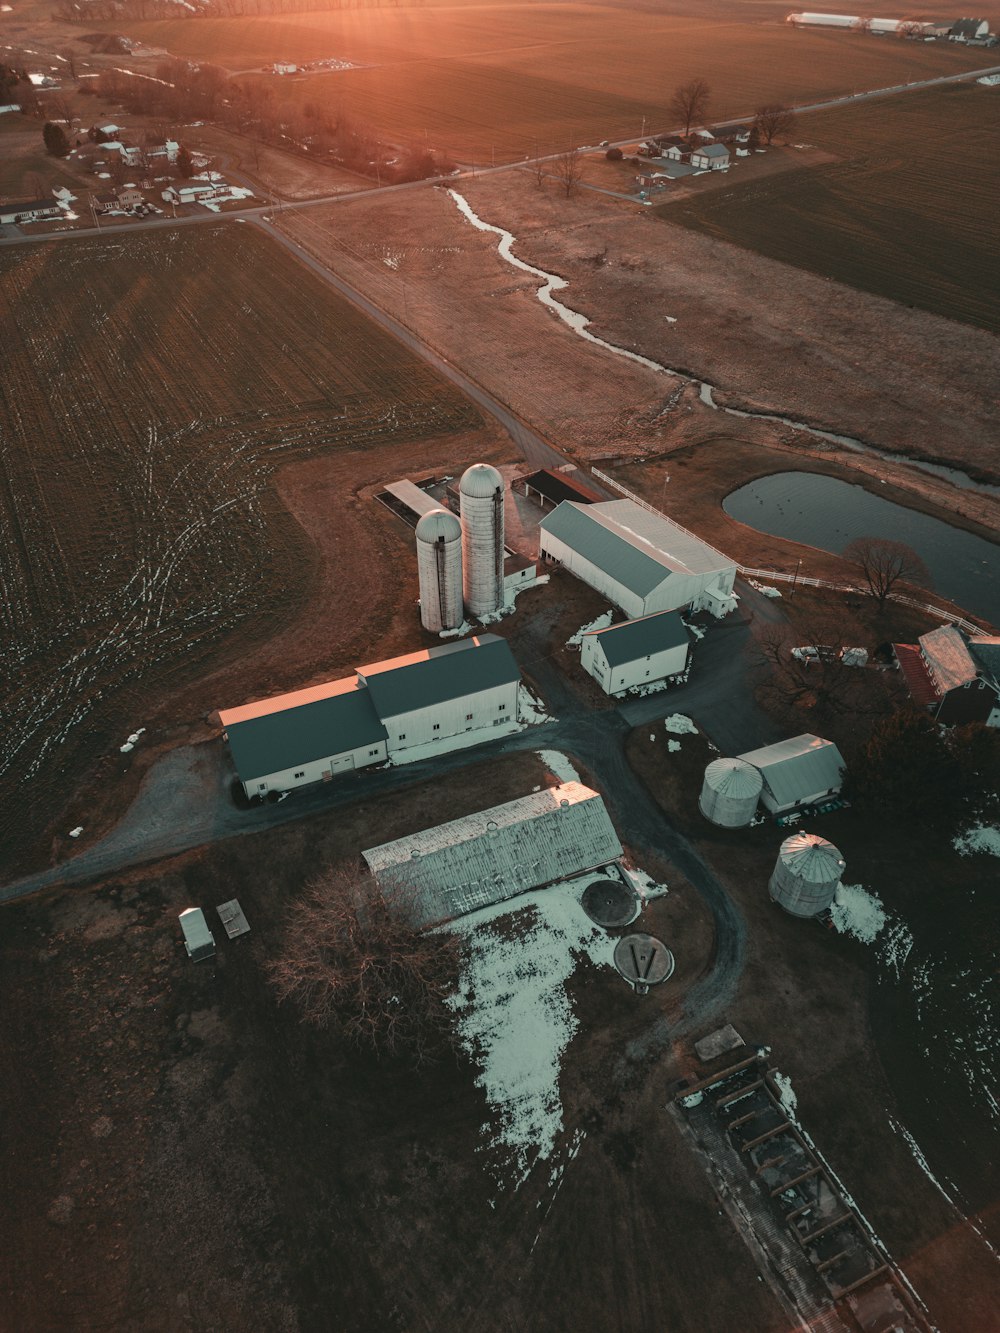 an aerial view of a farm in the country